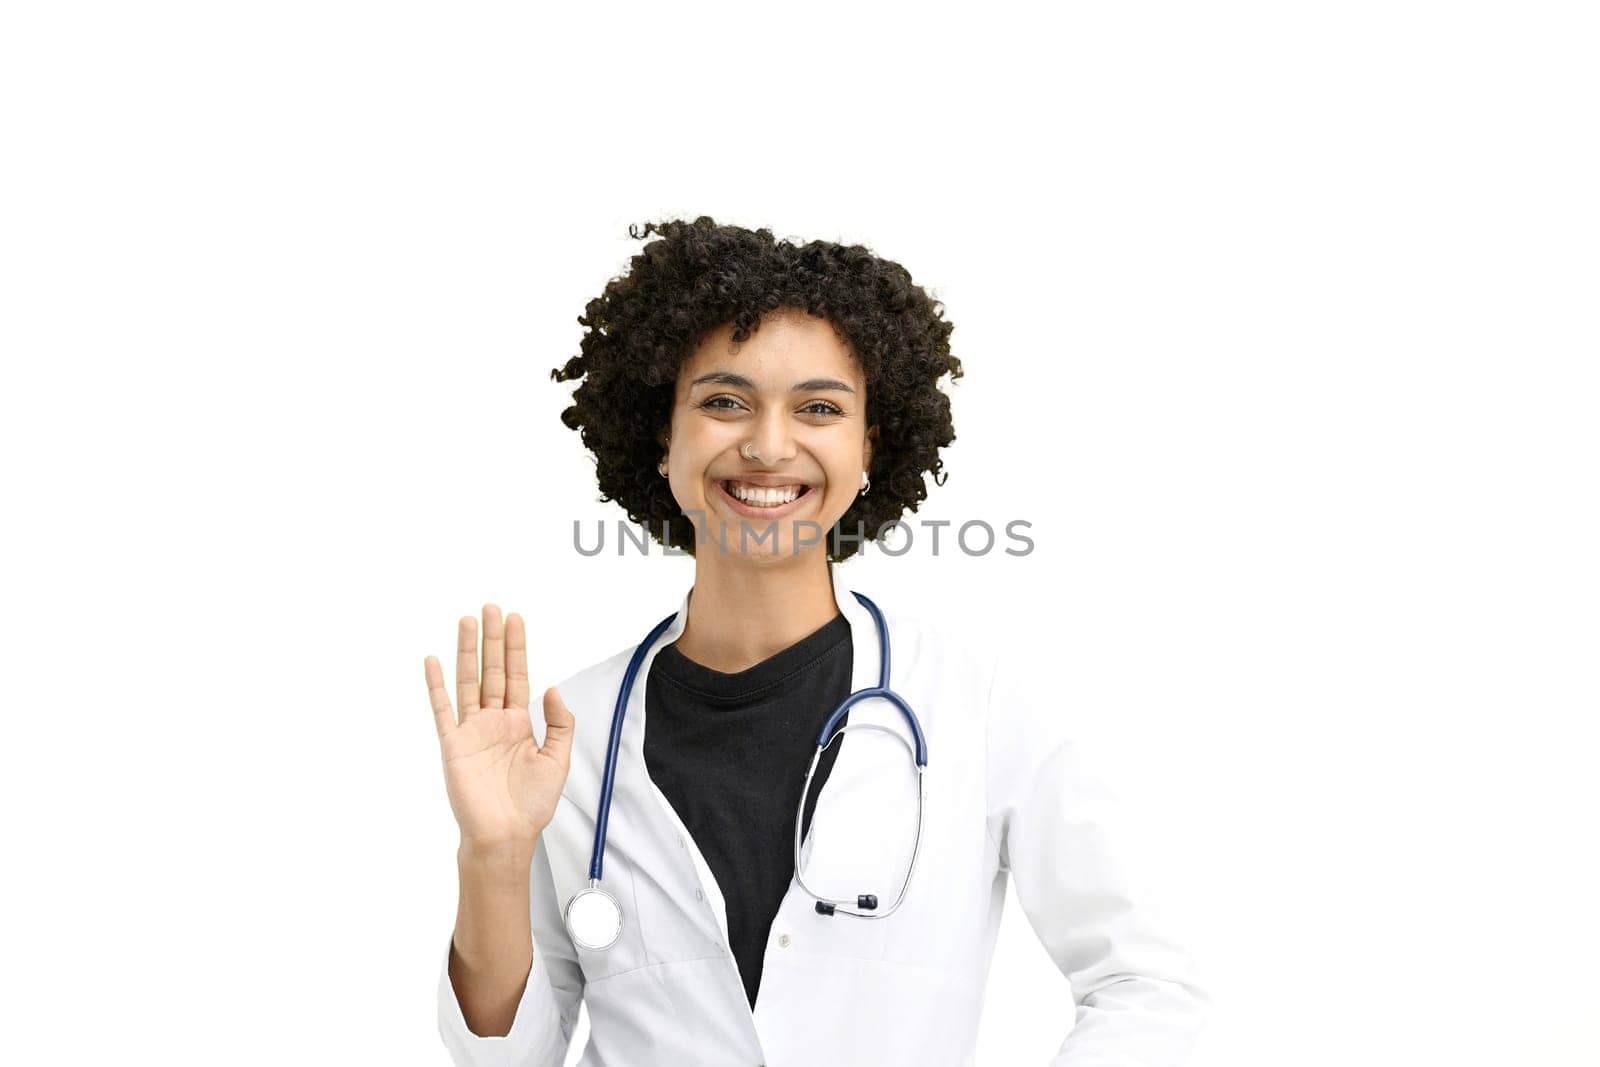 Female doctor, close-up, on a white background, waving her hand by Prosto